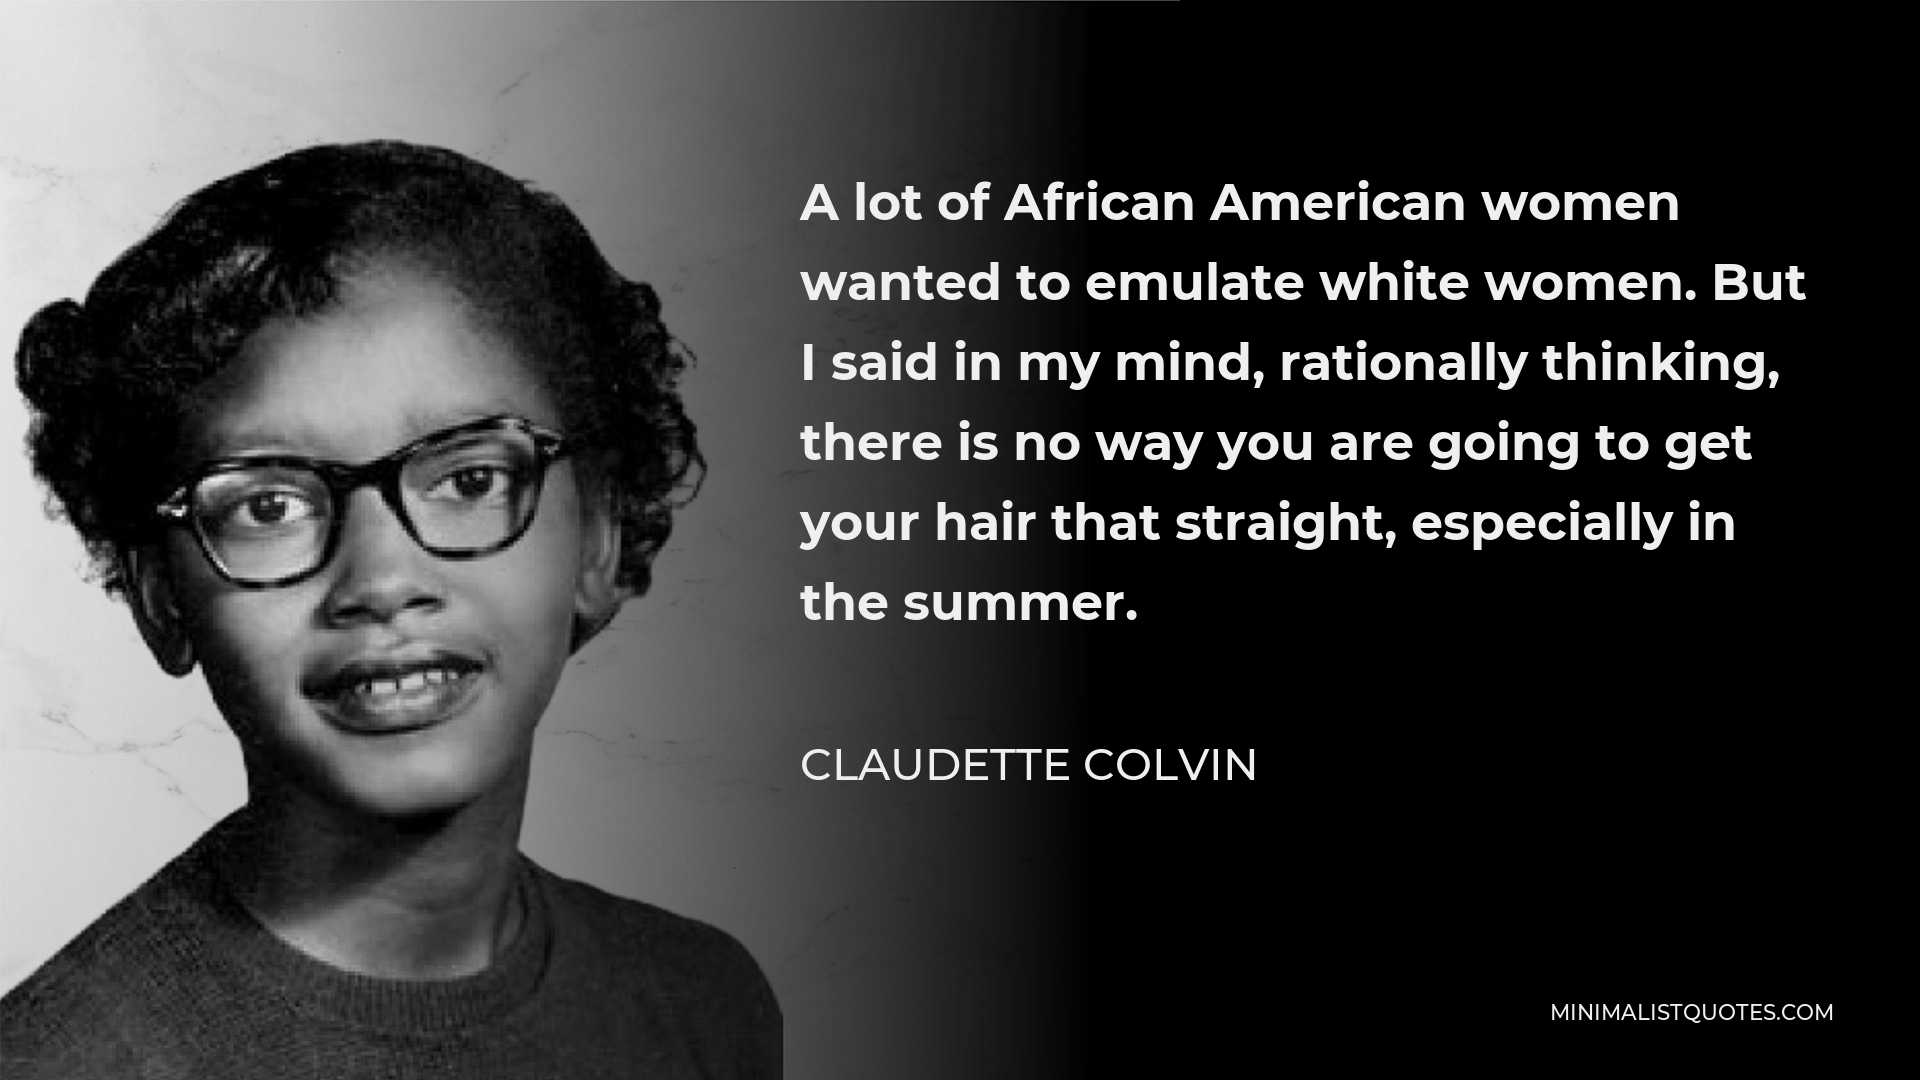 Claudette Colvin Quote - A lot of African American women wanted to emulate white women. But I said in my mind, rationally thinking, there is no way you are going to get your hair that straight, especially in the summer.